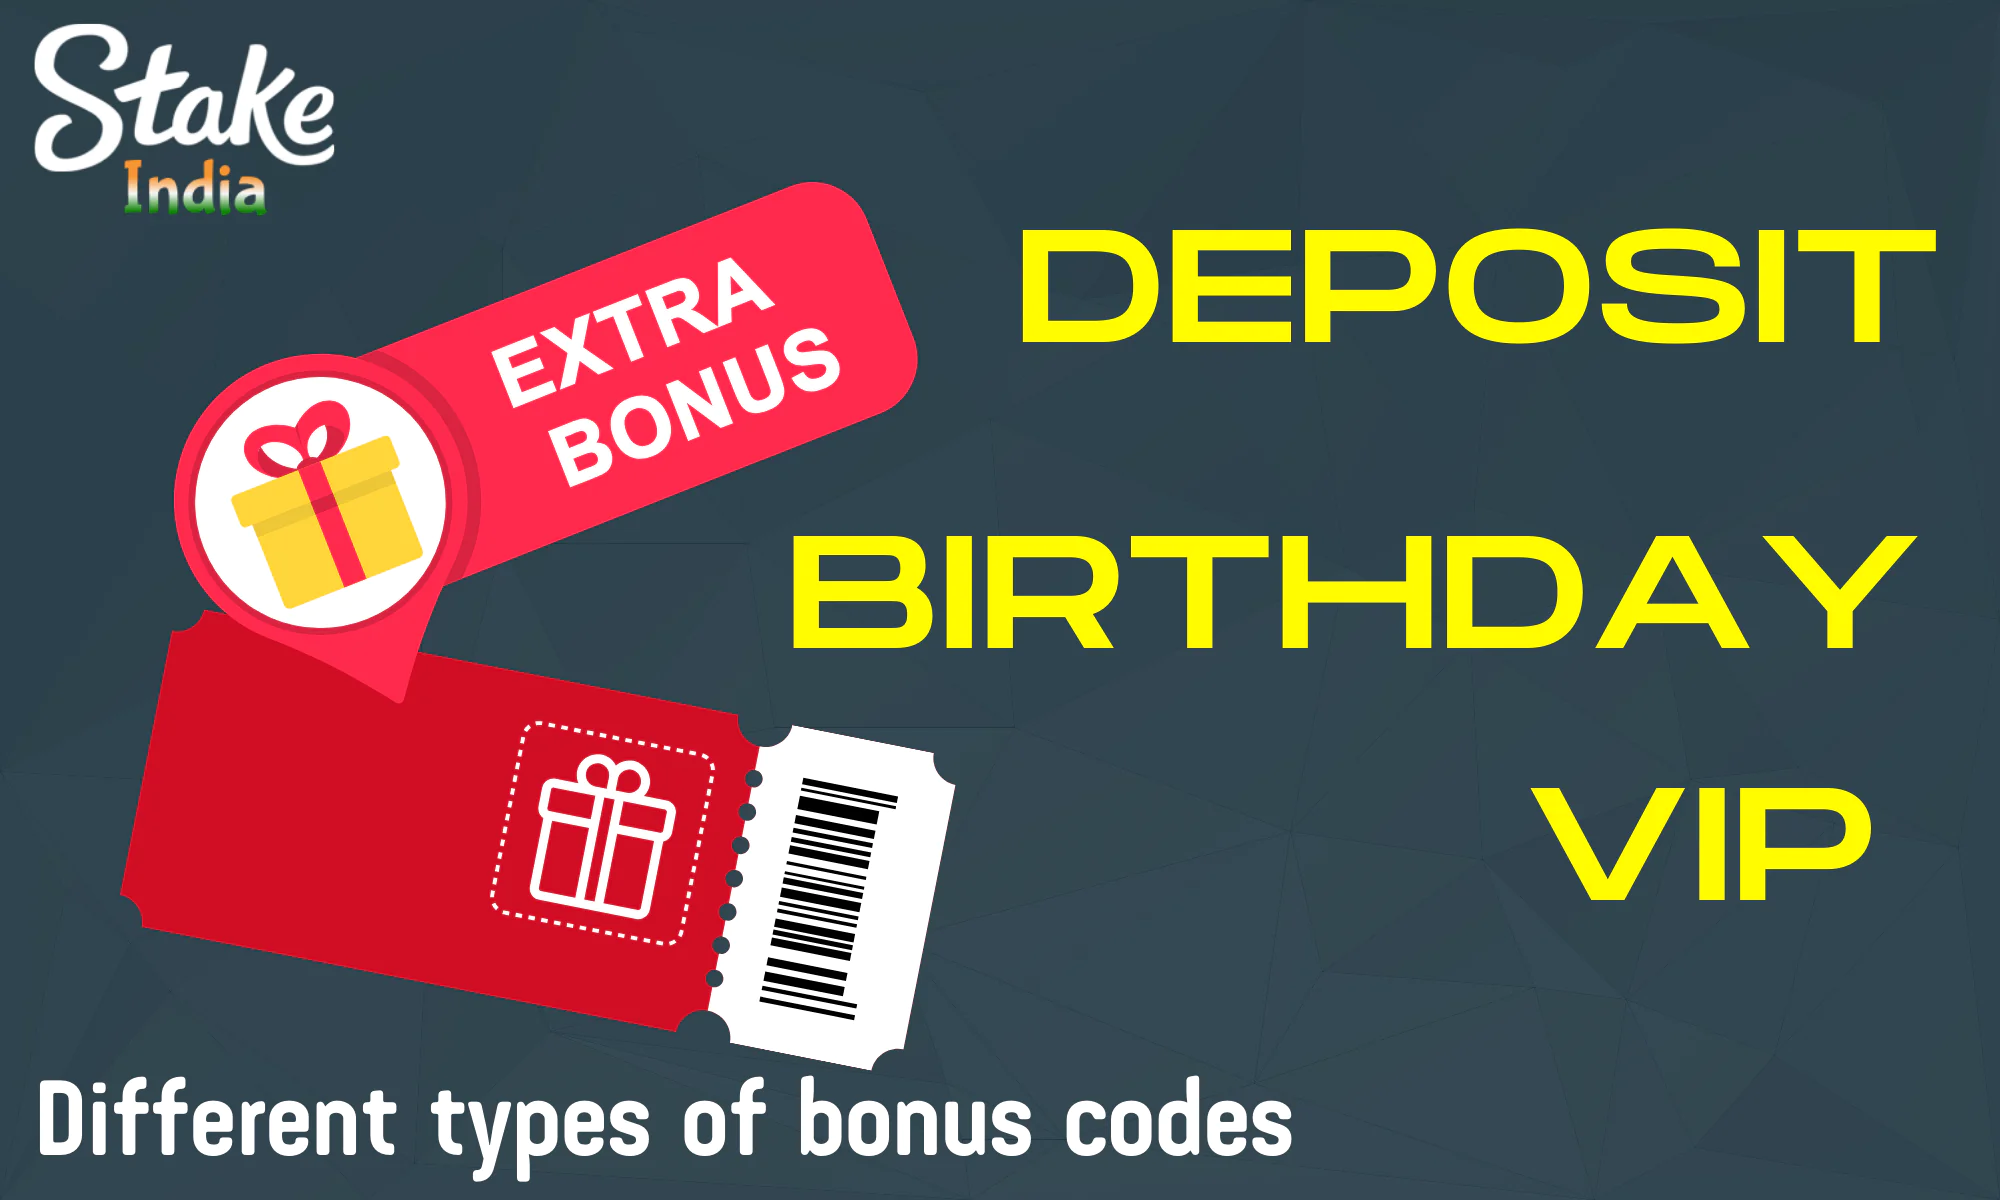 What types of bonus codes are available at Stake Casino